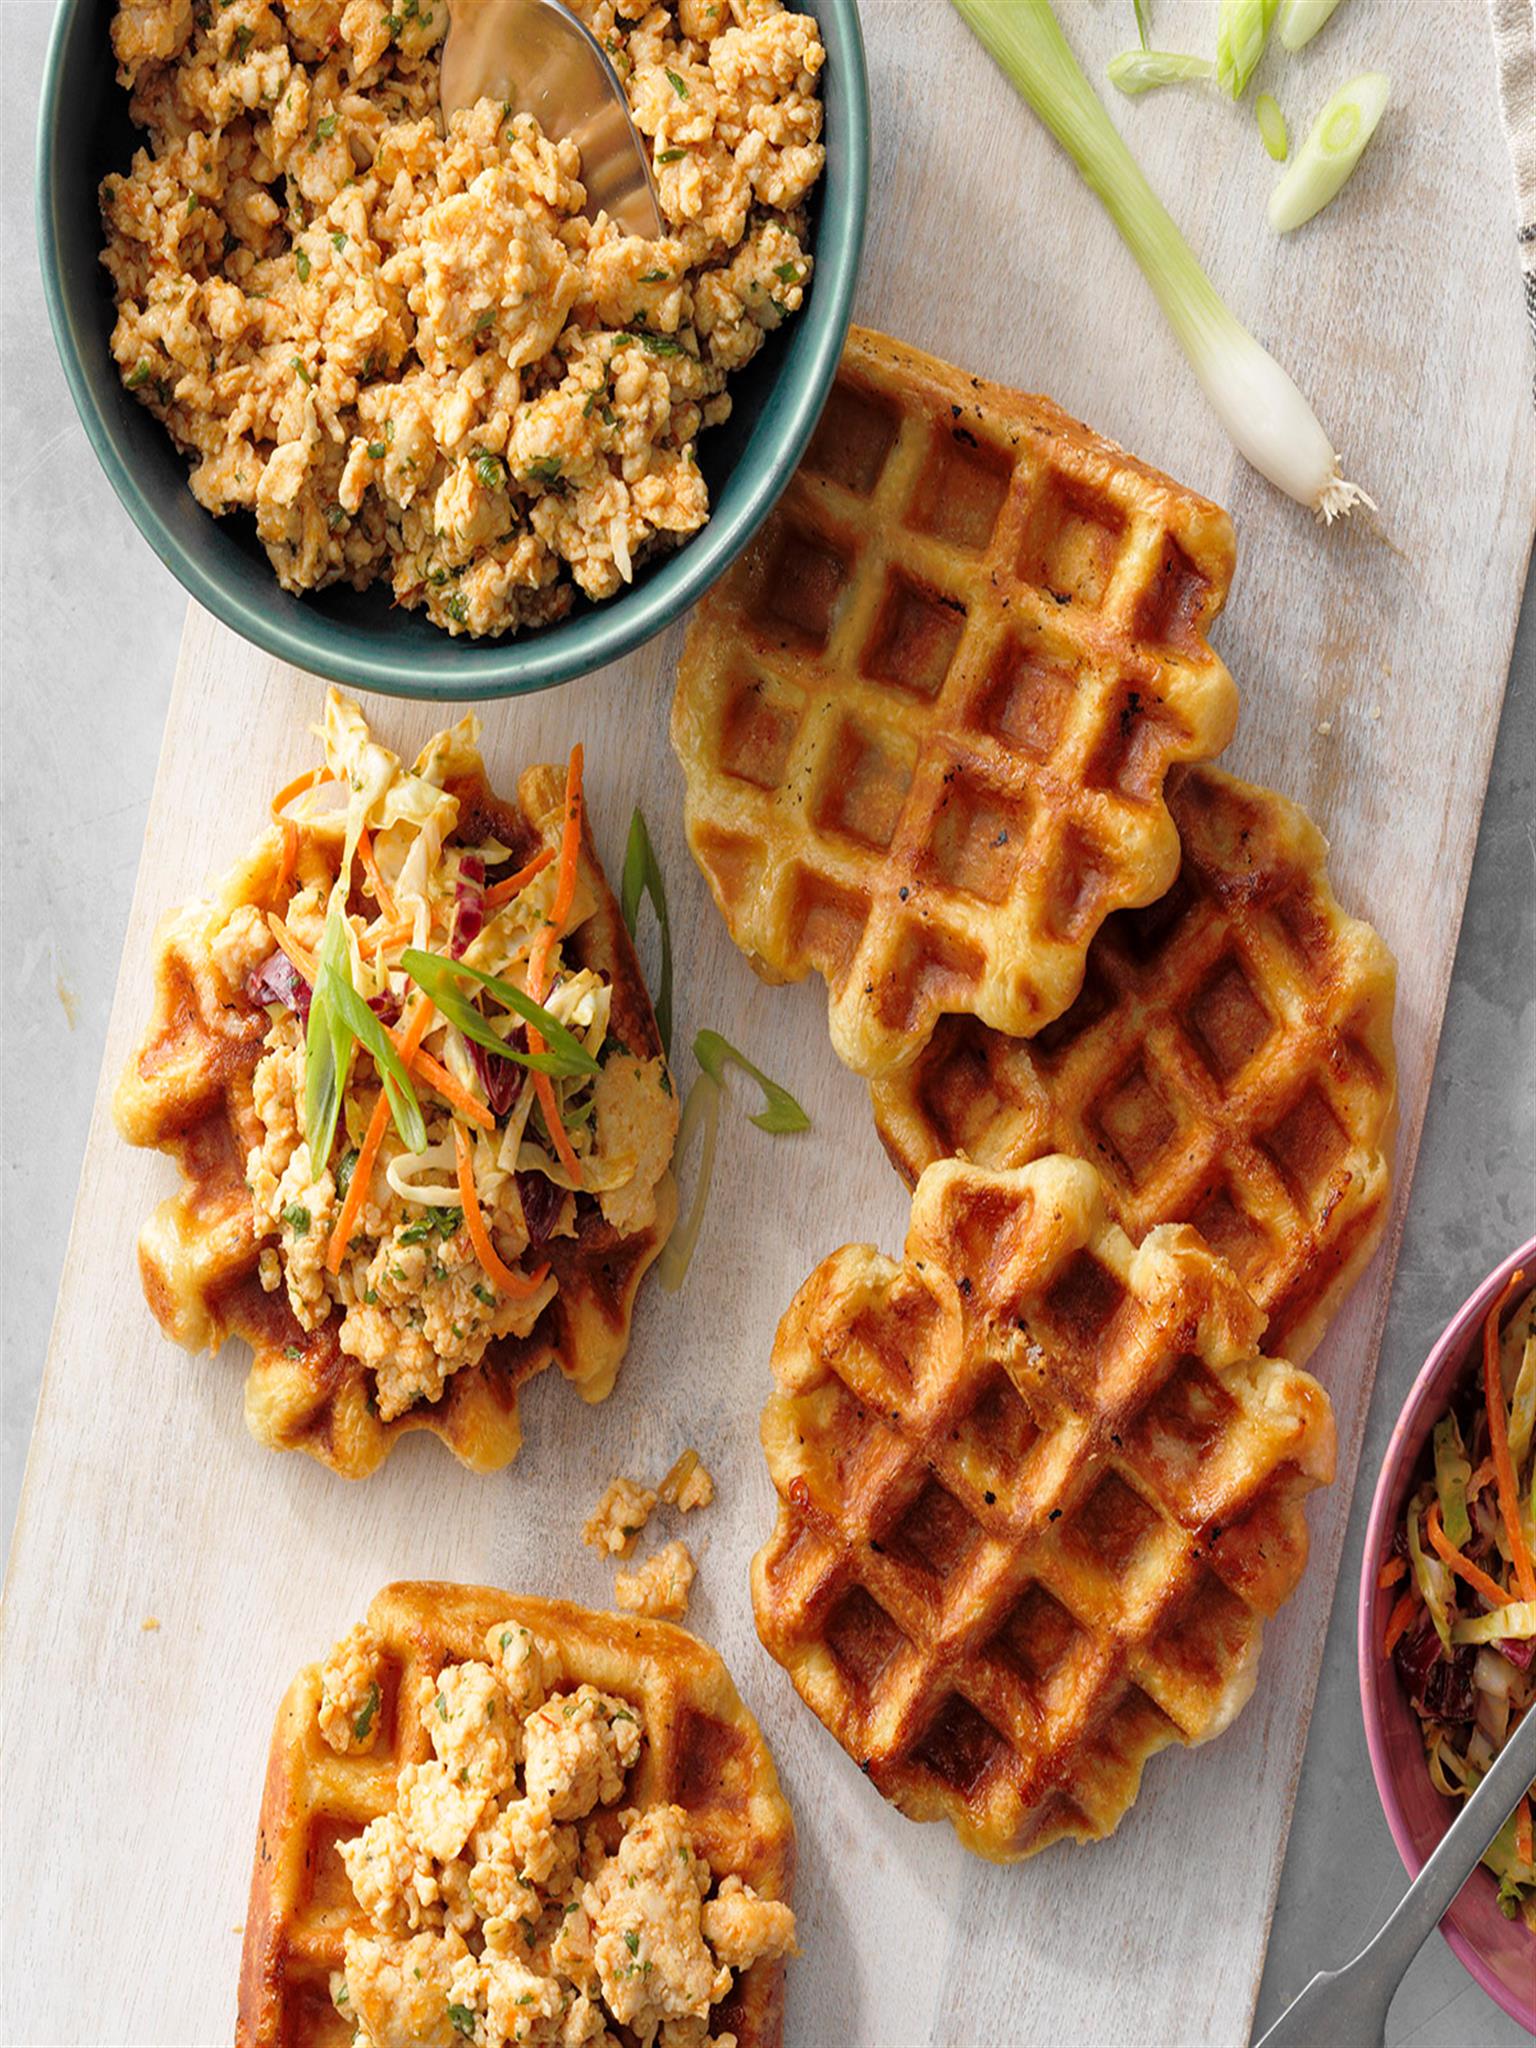 Peanut Cilantro Ground Chicken And Waffles Recipe How To Make It